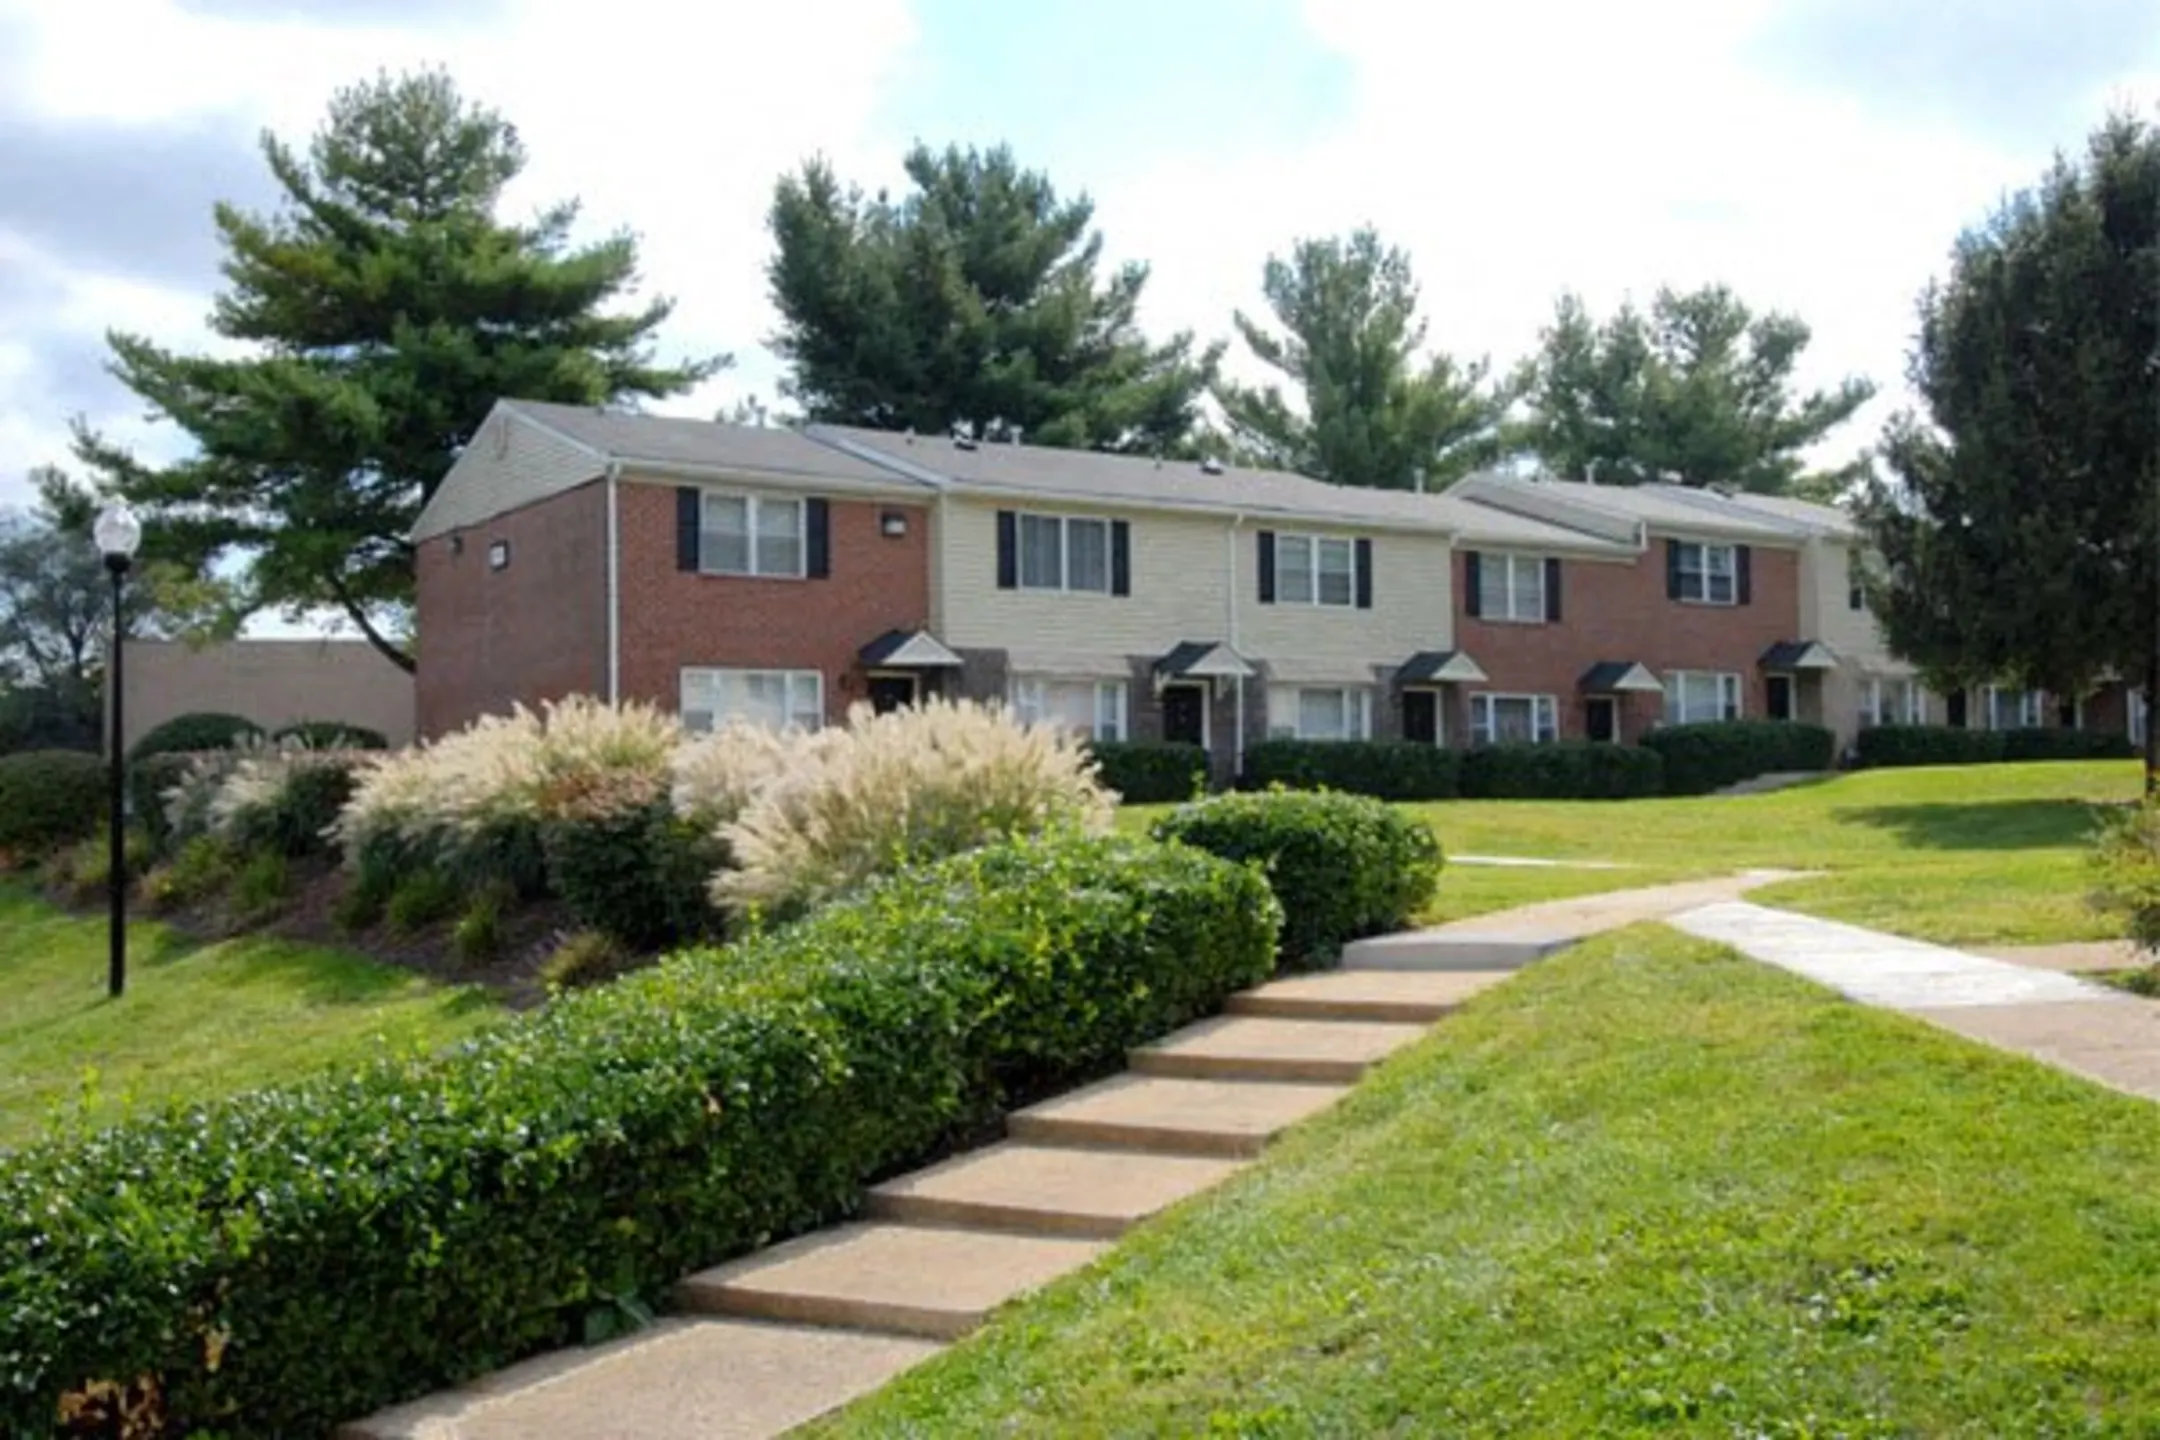 Building - Cedar Gardens & Towers Apartments & Townhomes - Windsor Mill, MD